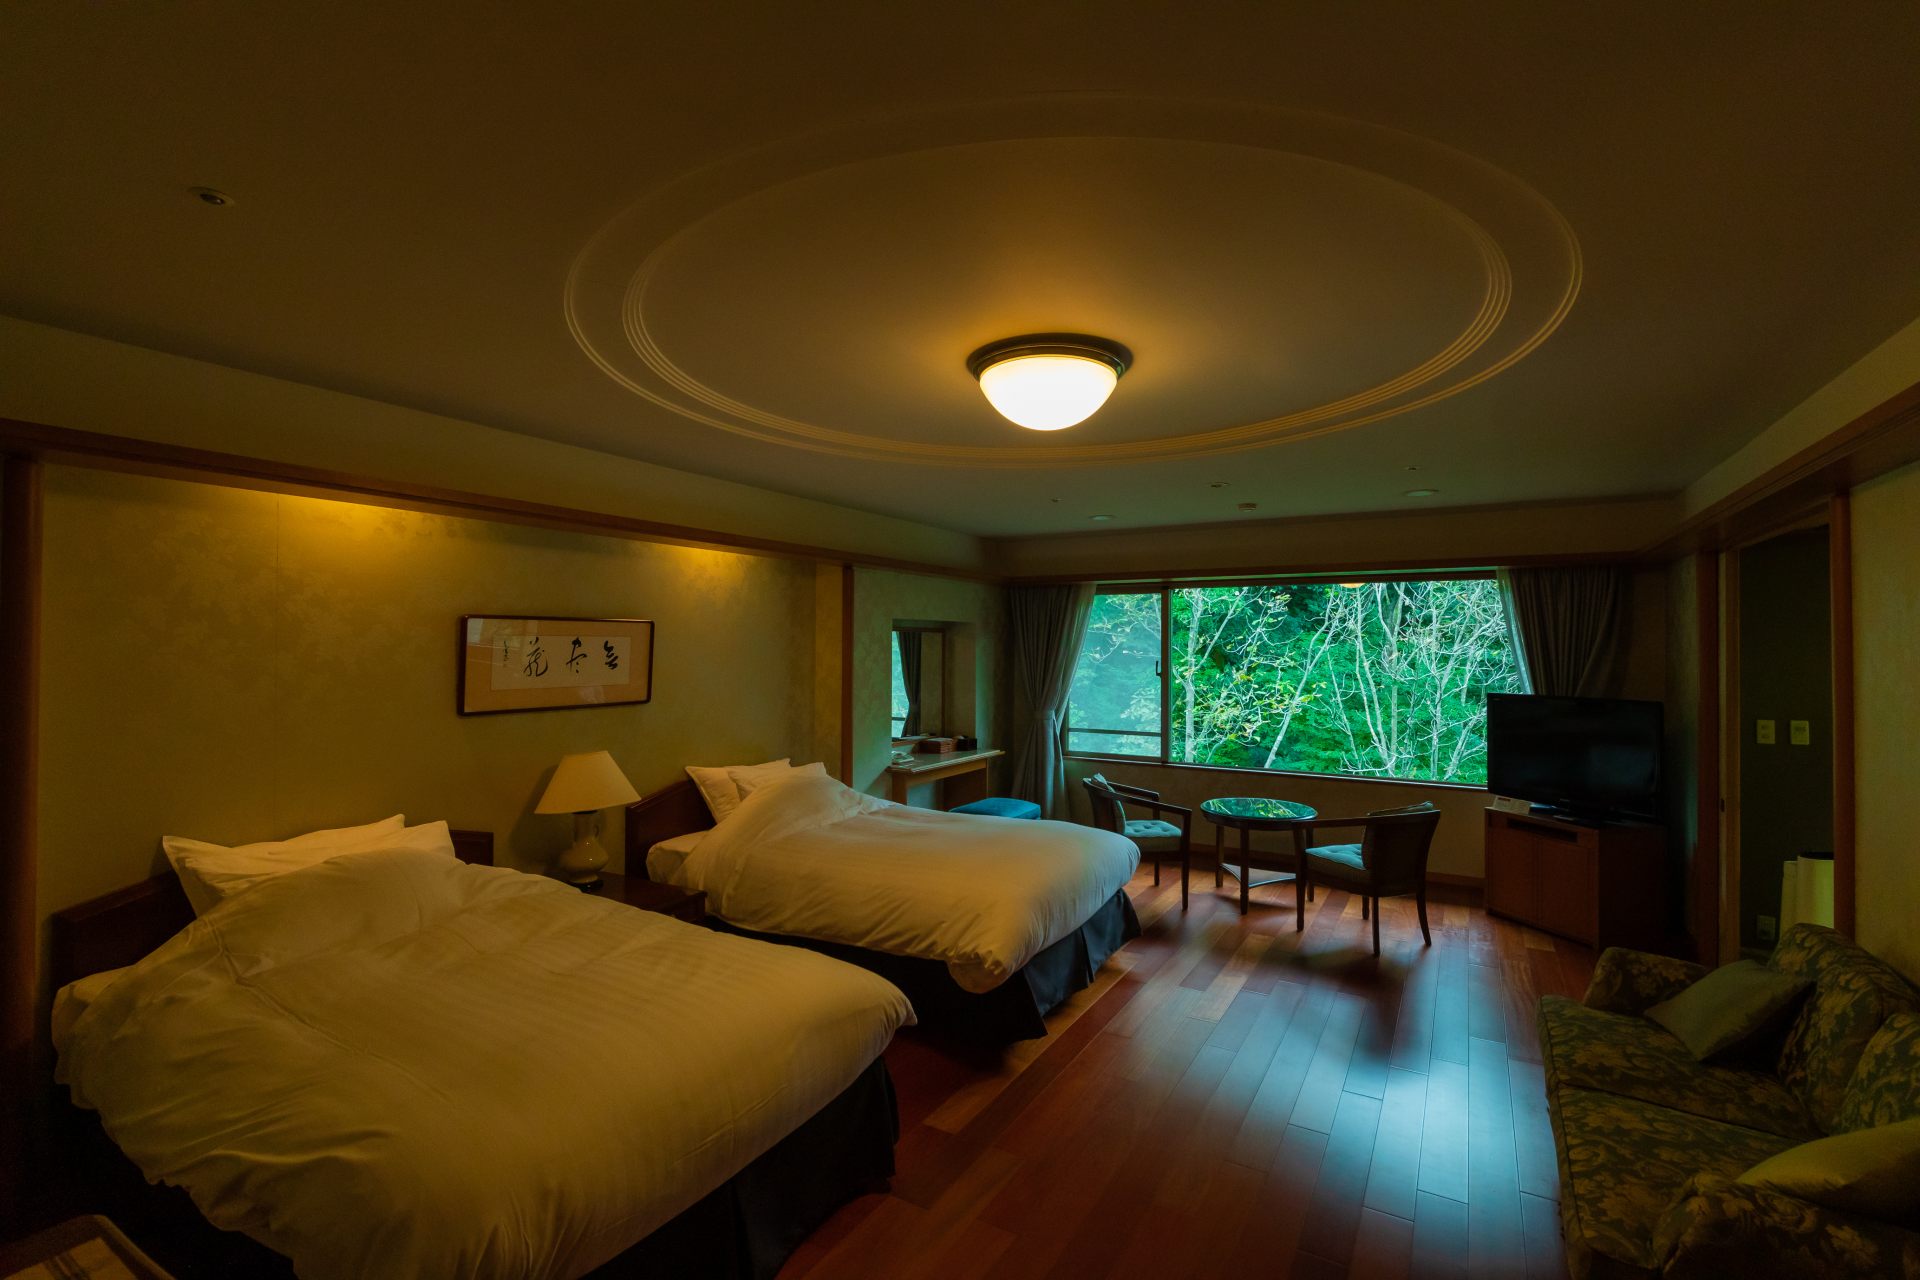 Besides bedrooms, there are premium rooms in Japanese/western combination style.